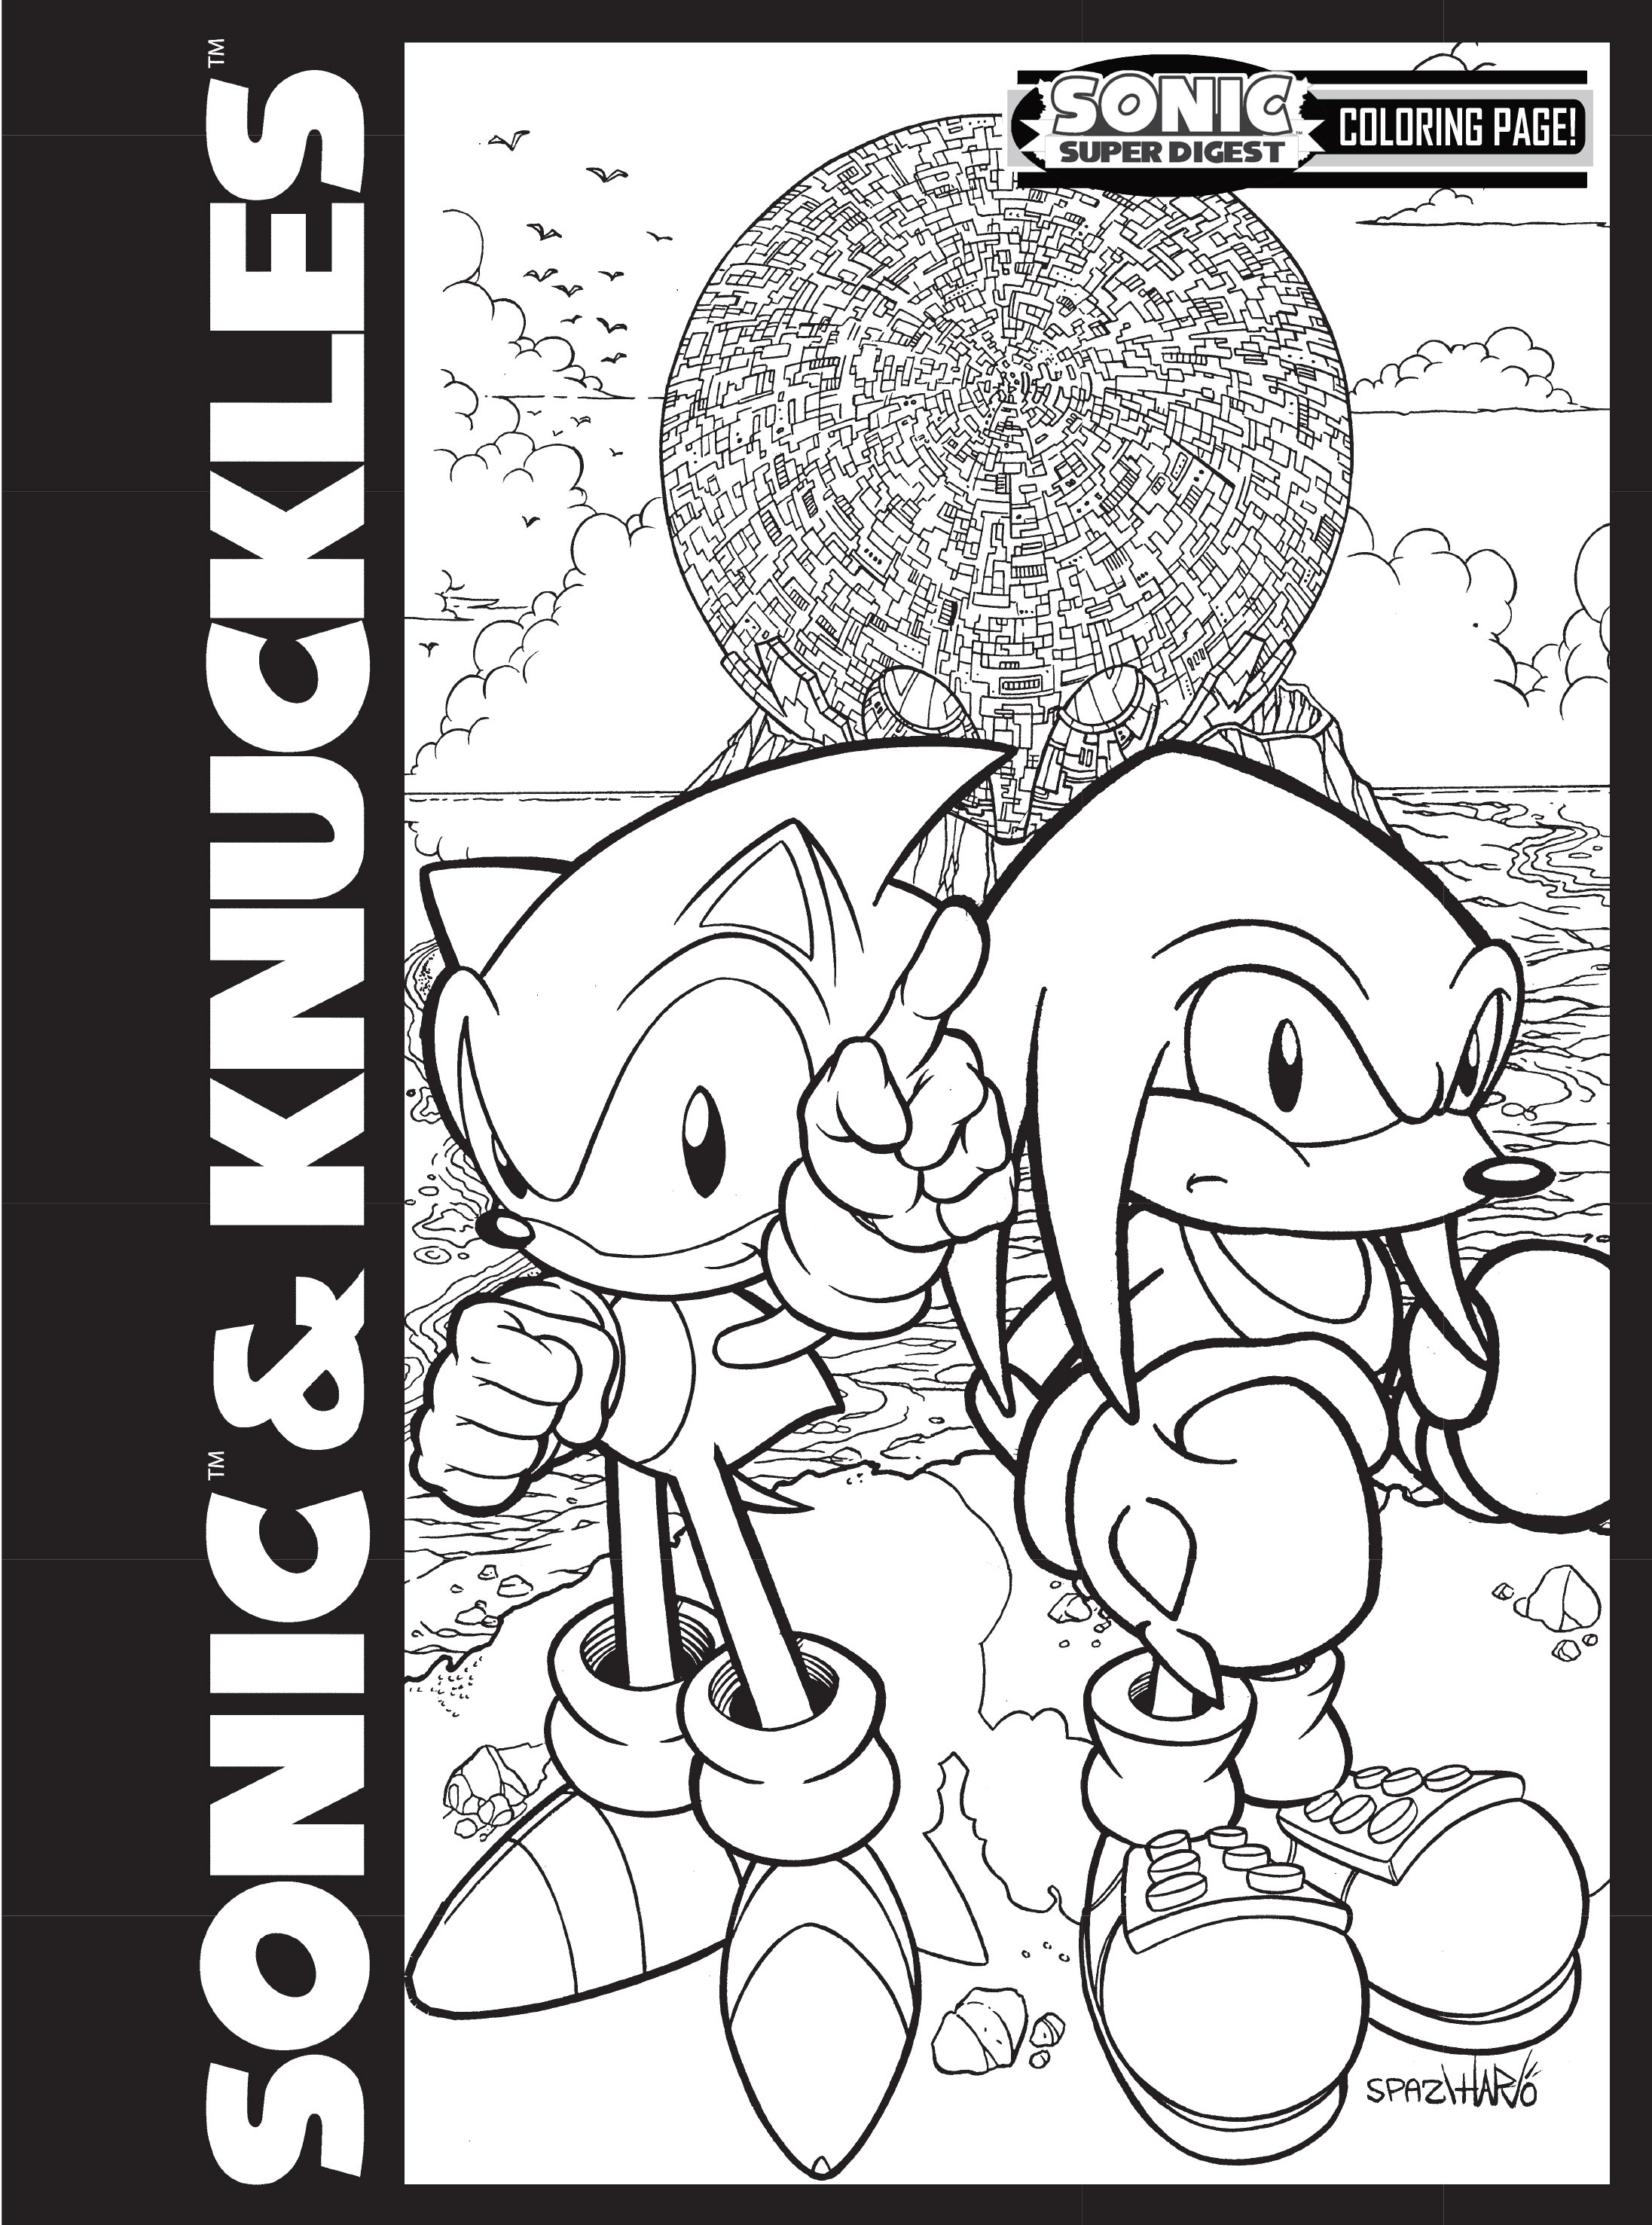 Read online Sonic Super Digest comic -  Issue #7 - 114